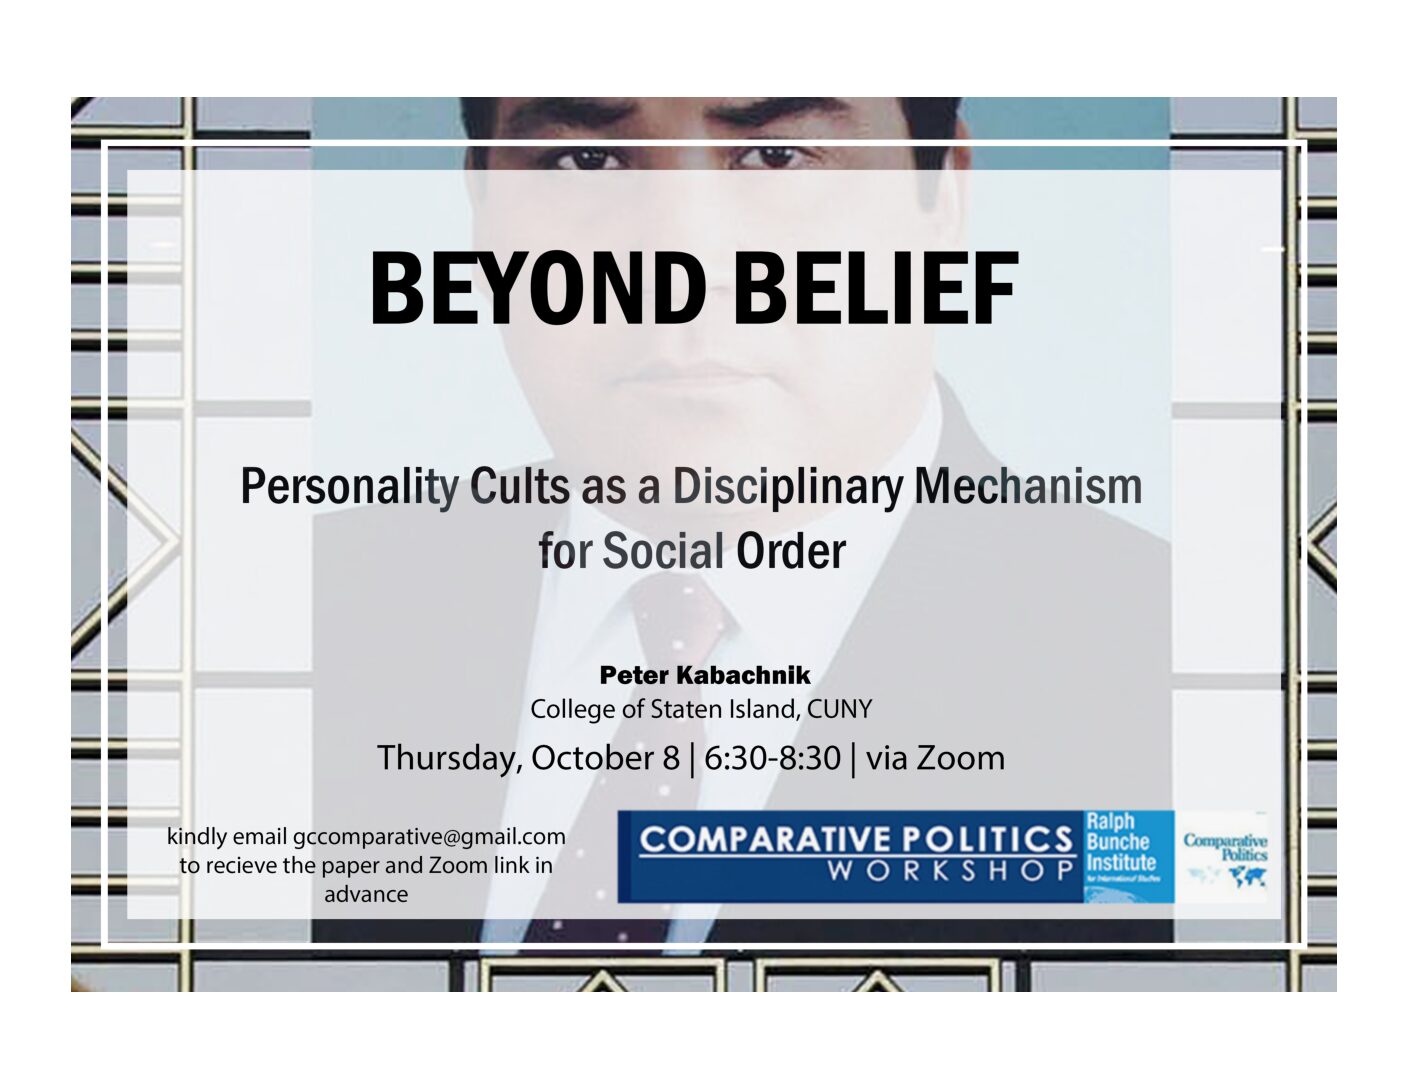 CPW: Peter Kabachnik, “Beyond Belief: Personality Cult Discourse as a Disciplinary Mechanism for Social Order" Thursday, October 8, 6:30PM